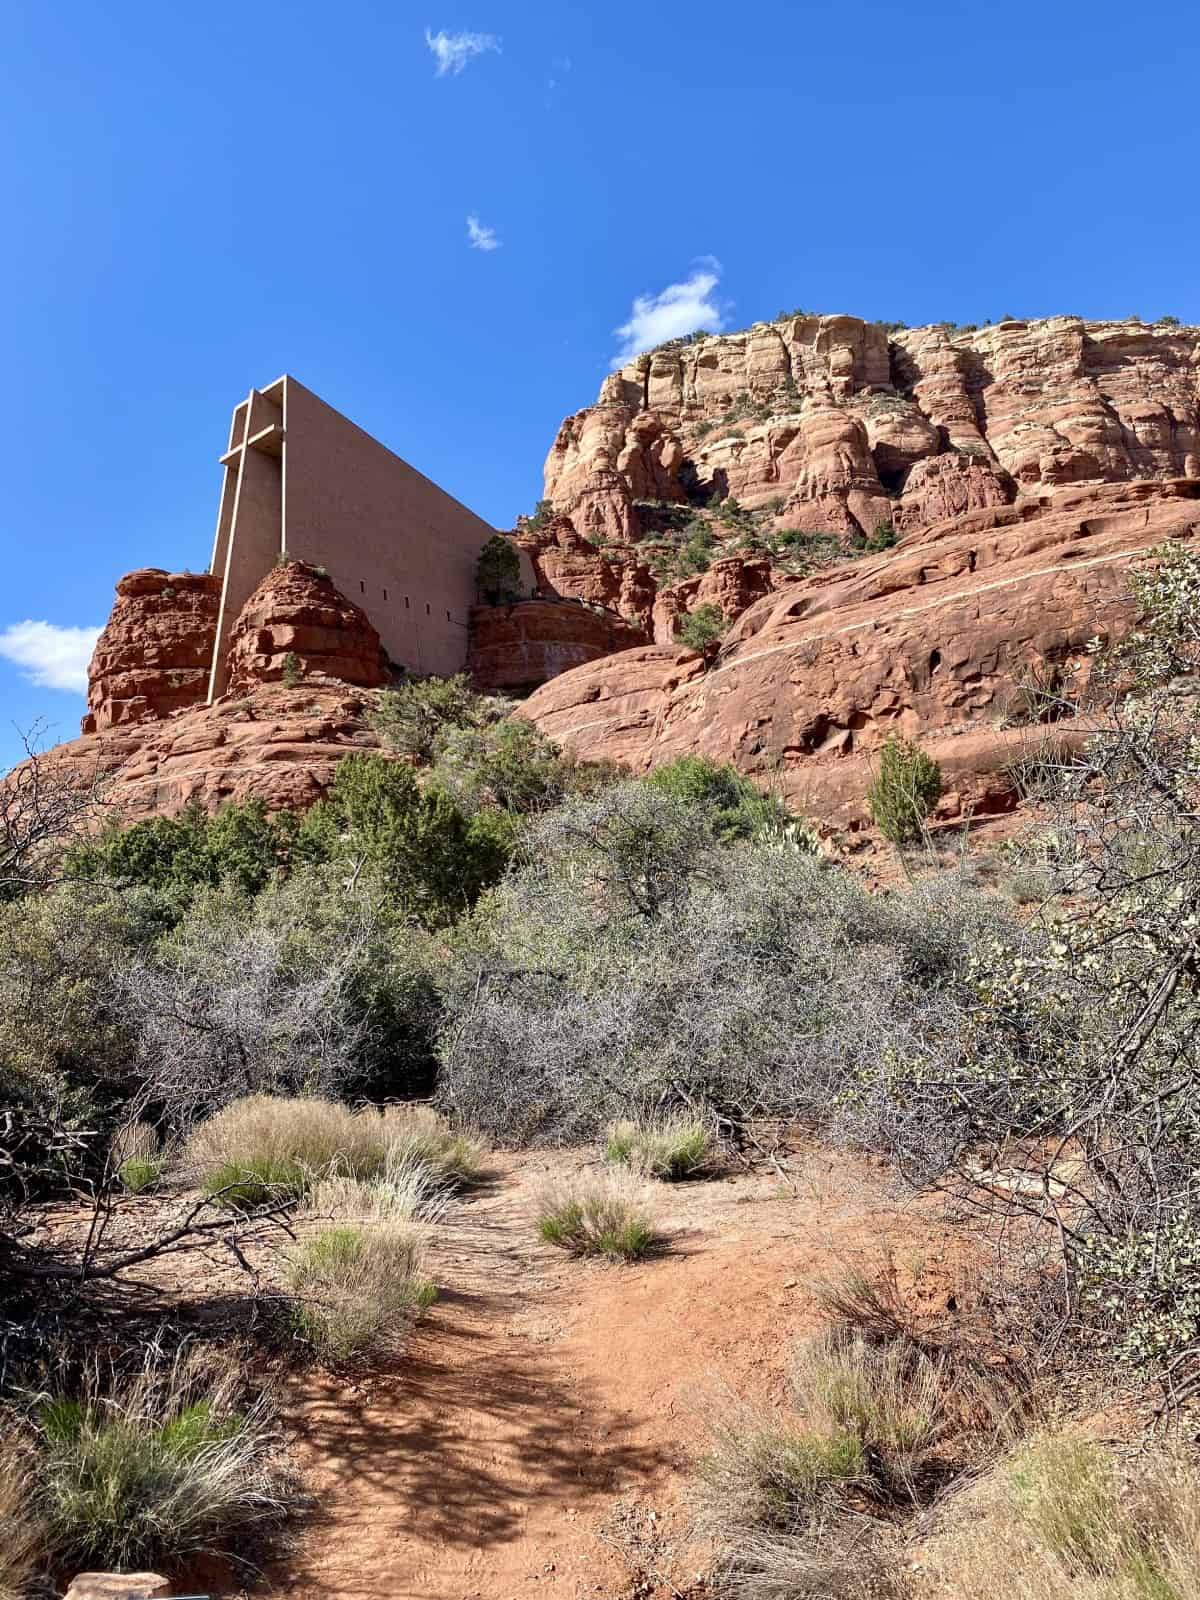 Visiting the Chapel of the Holy Cross in Sedona, Arizona | This unique church is an architectural gem built by a student of Frank Lloyd Wright, and an iconic view in Sedona's landscape | One Girl, Whole World